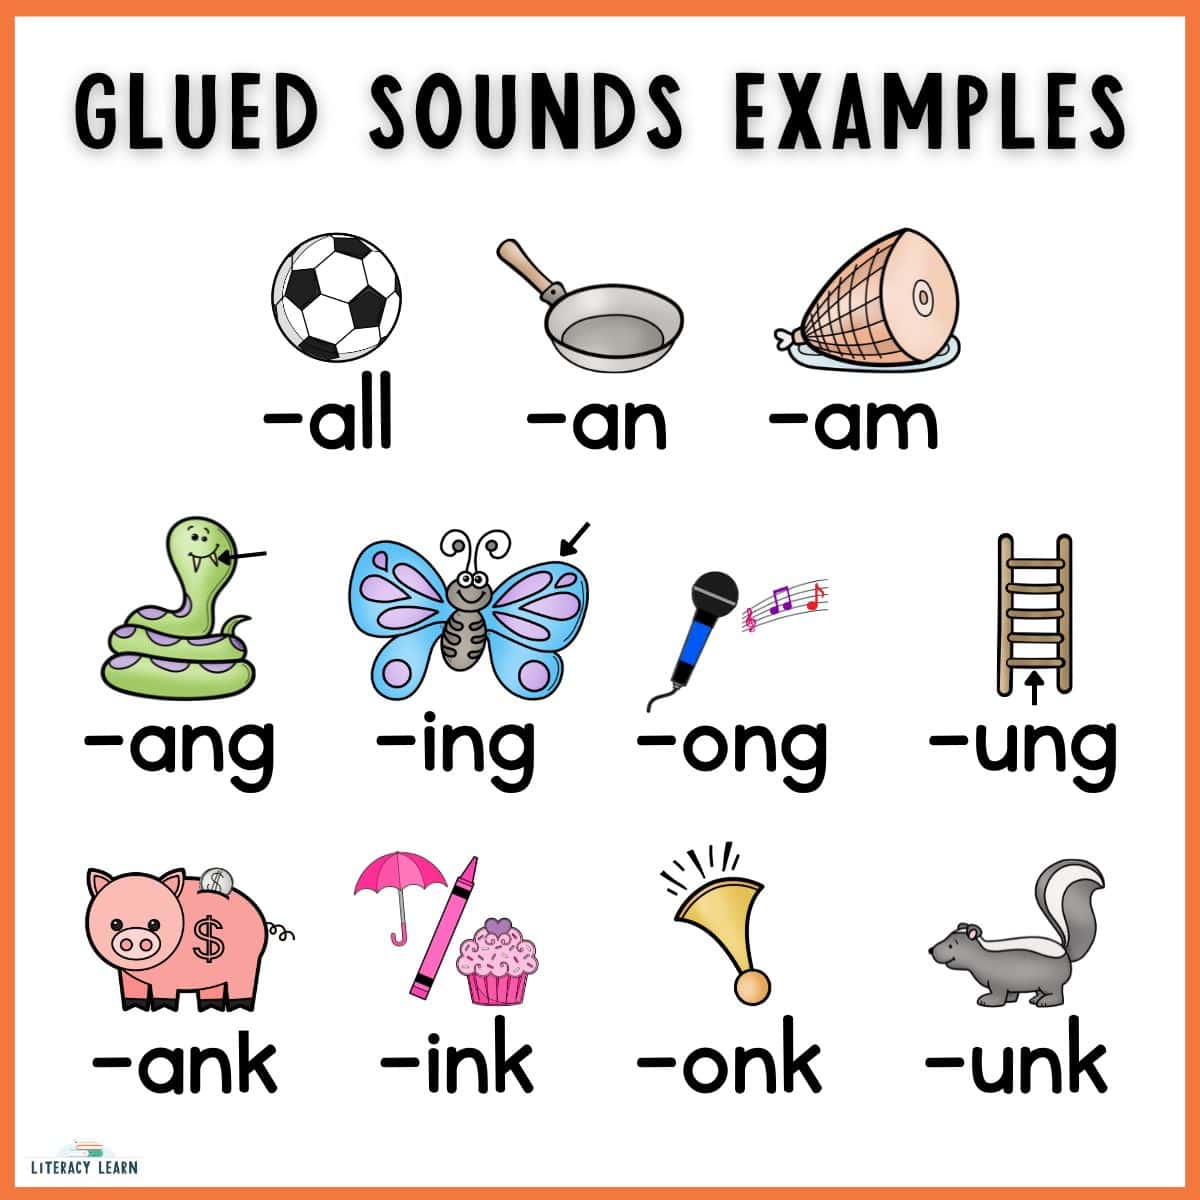 Graphic showing glued sound examples with anchor pictures for each glued sound.